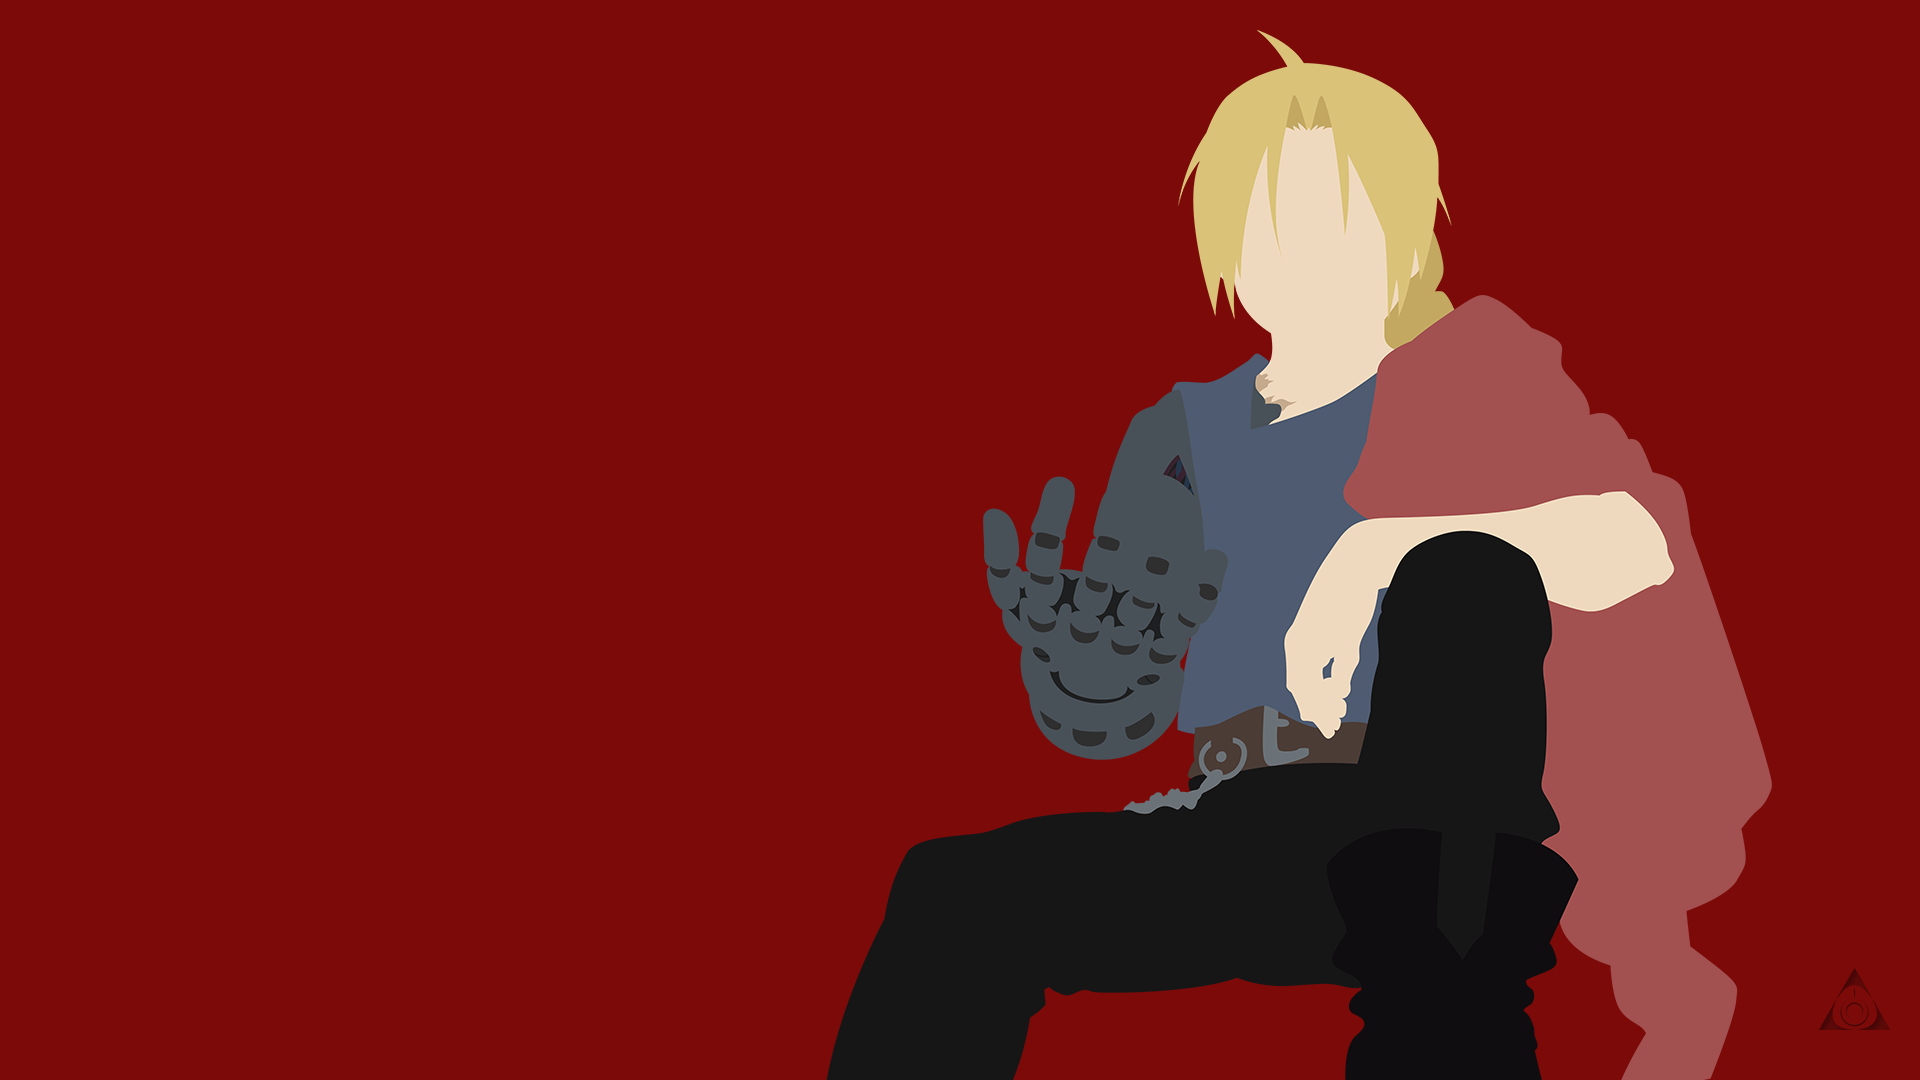 Edward Elric by xVordred